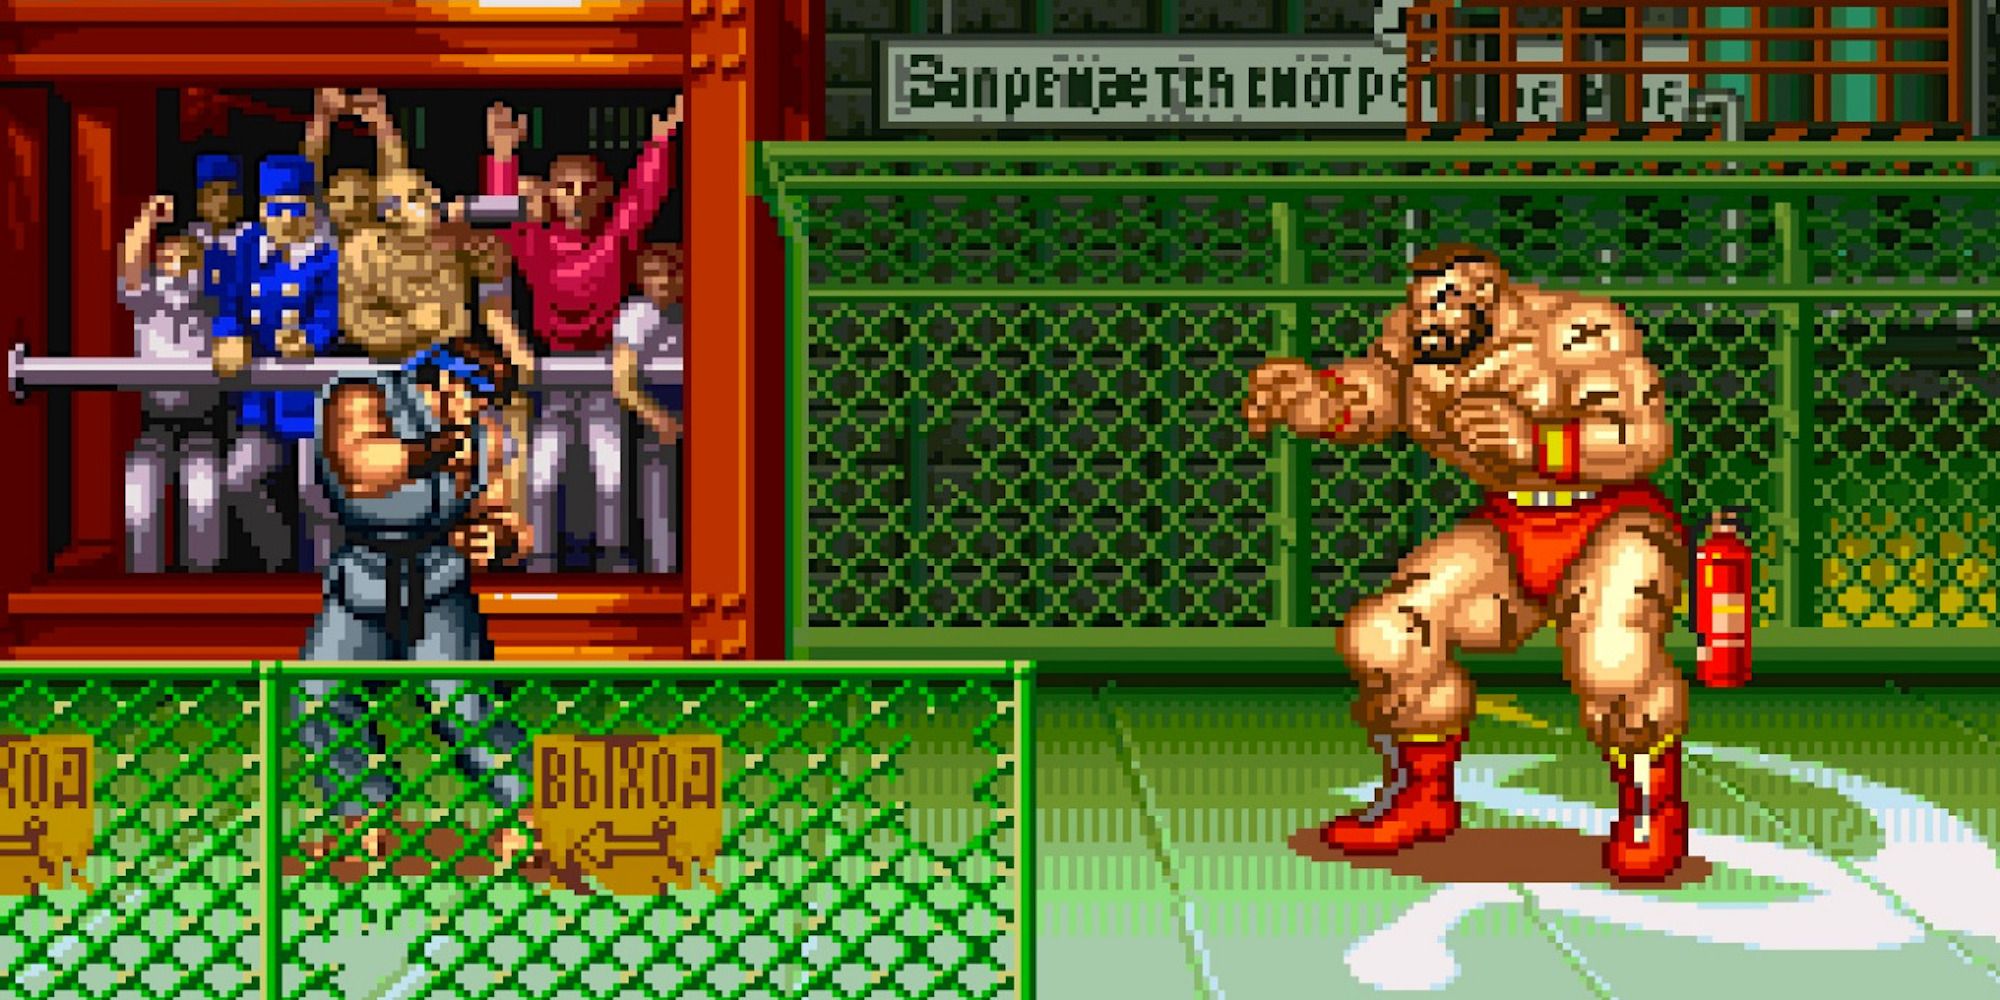 Fighting a match in Street Fighter 2 